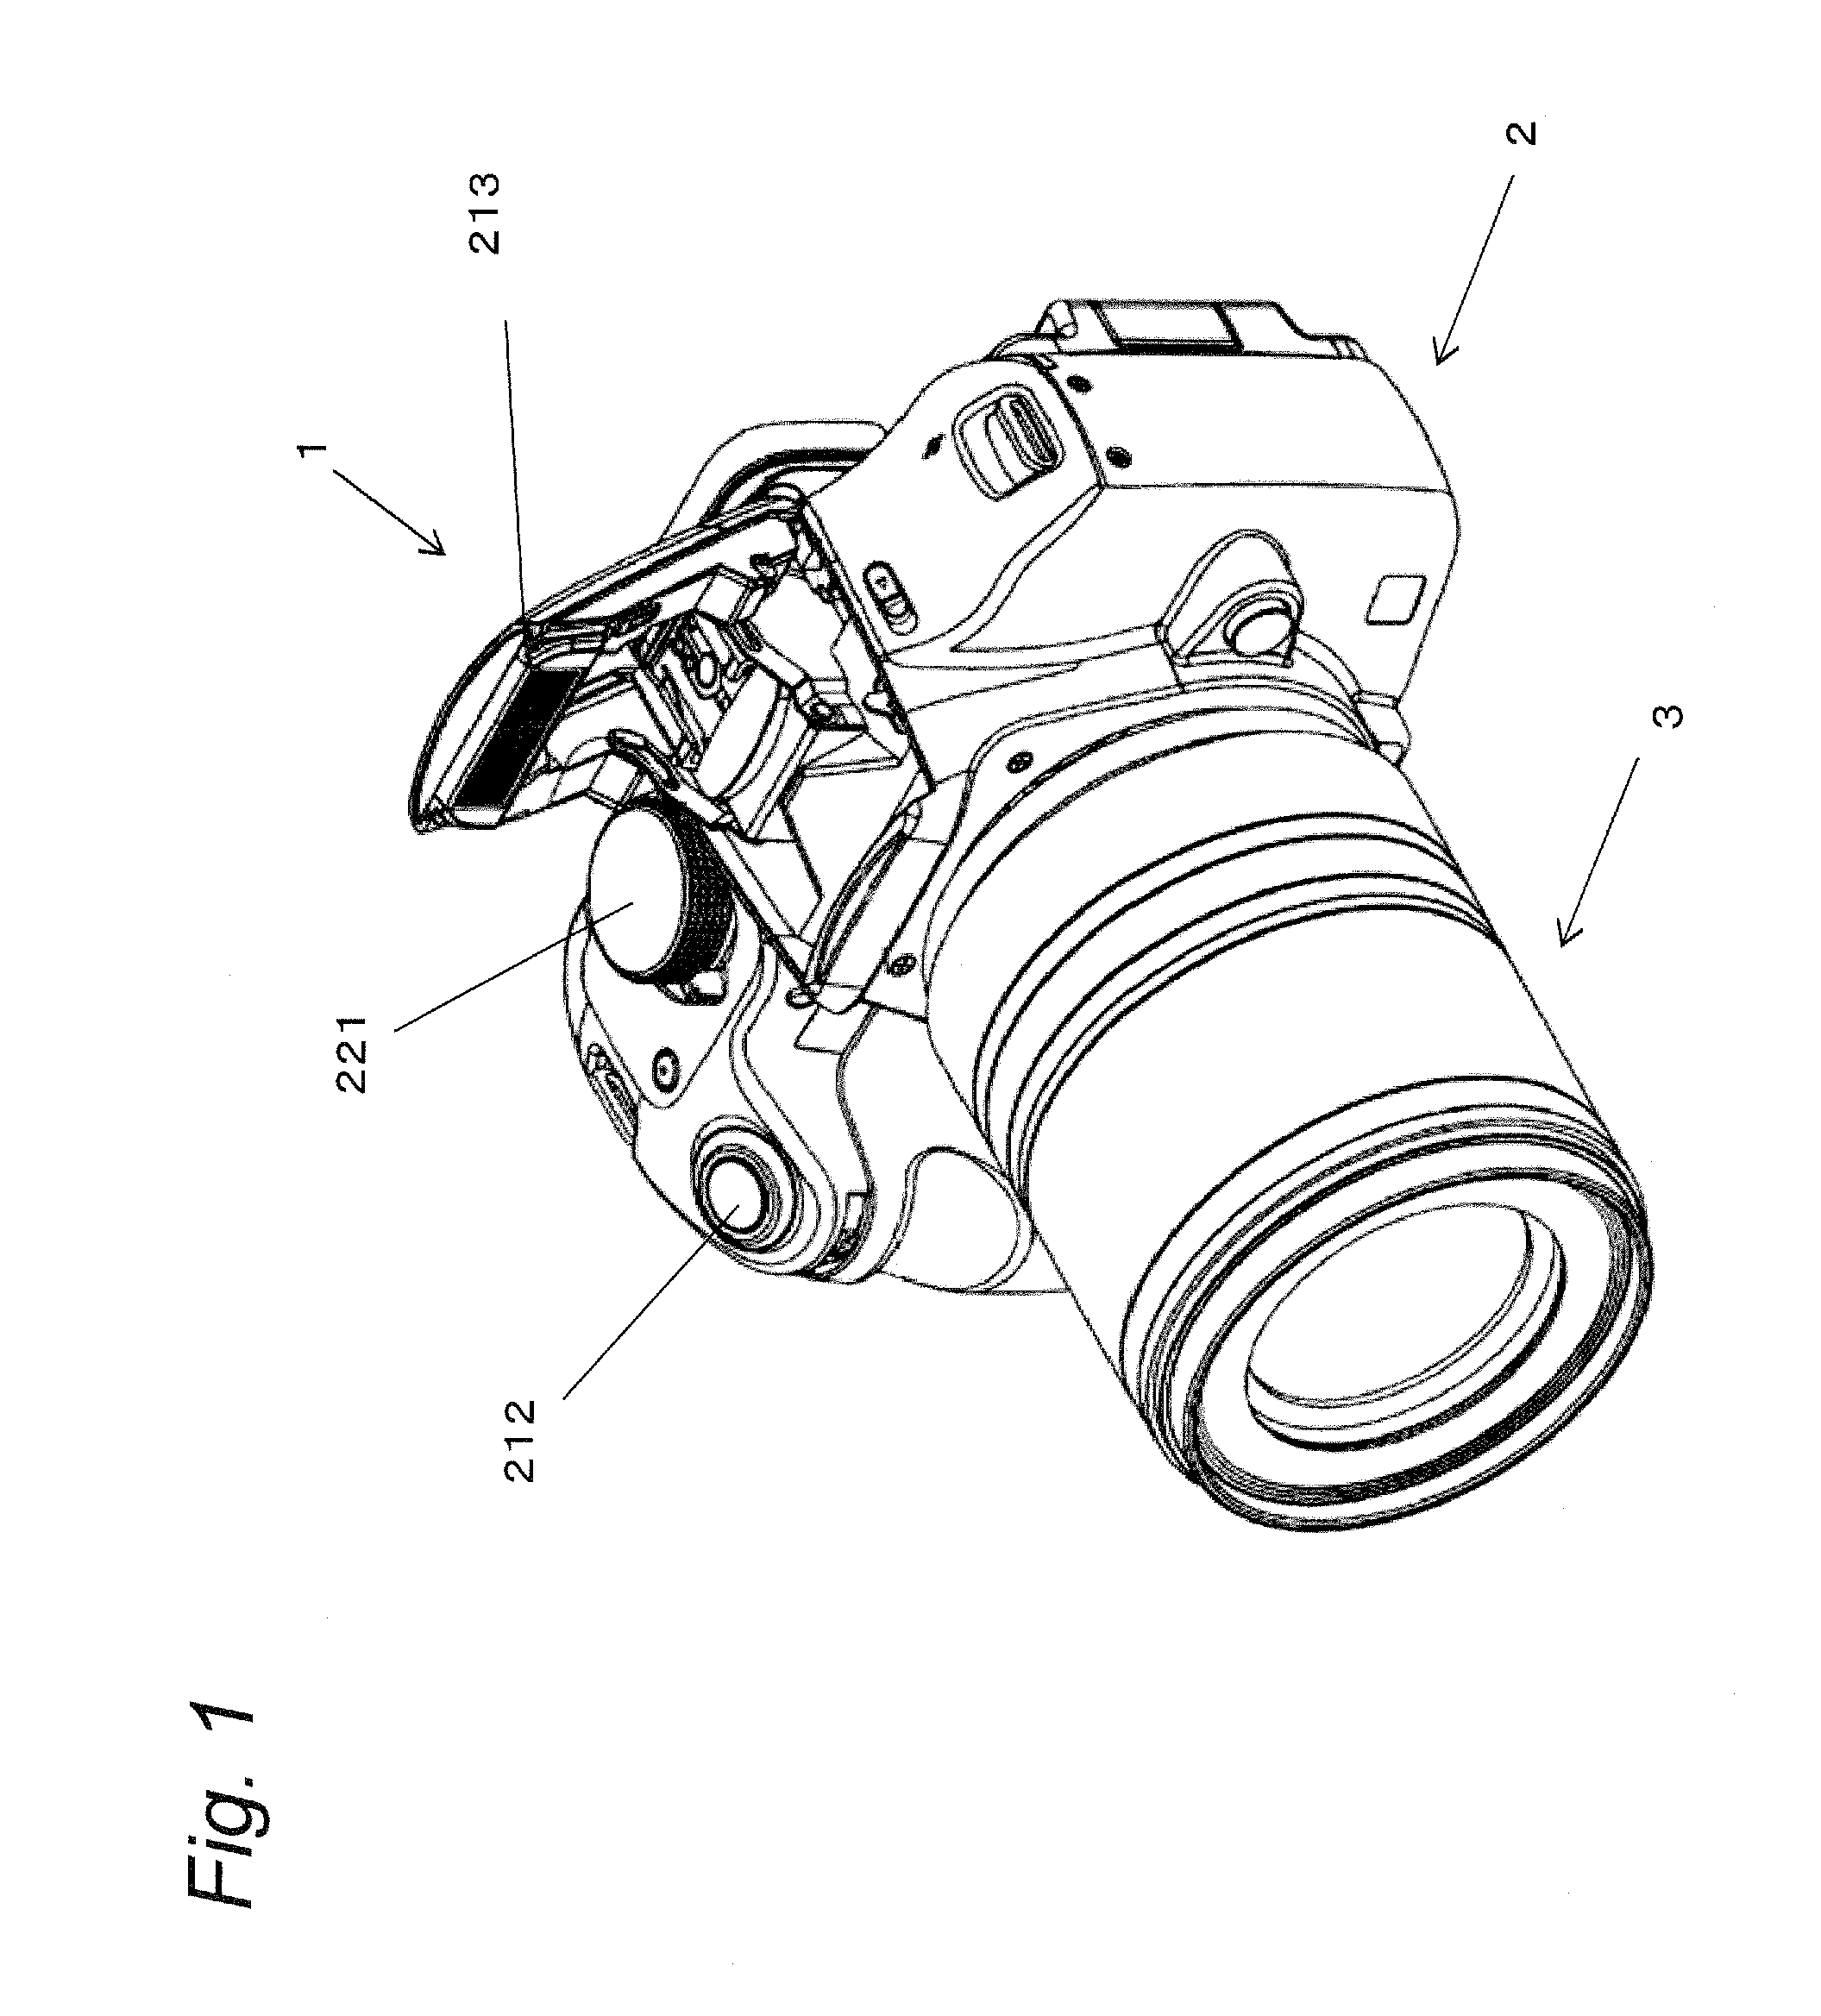 Imaging apparatus and camera system